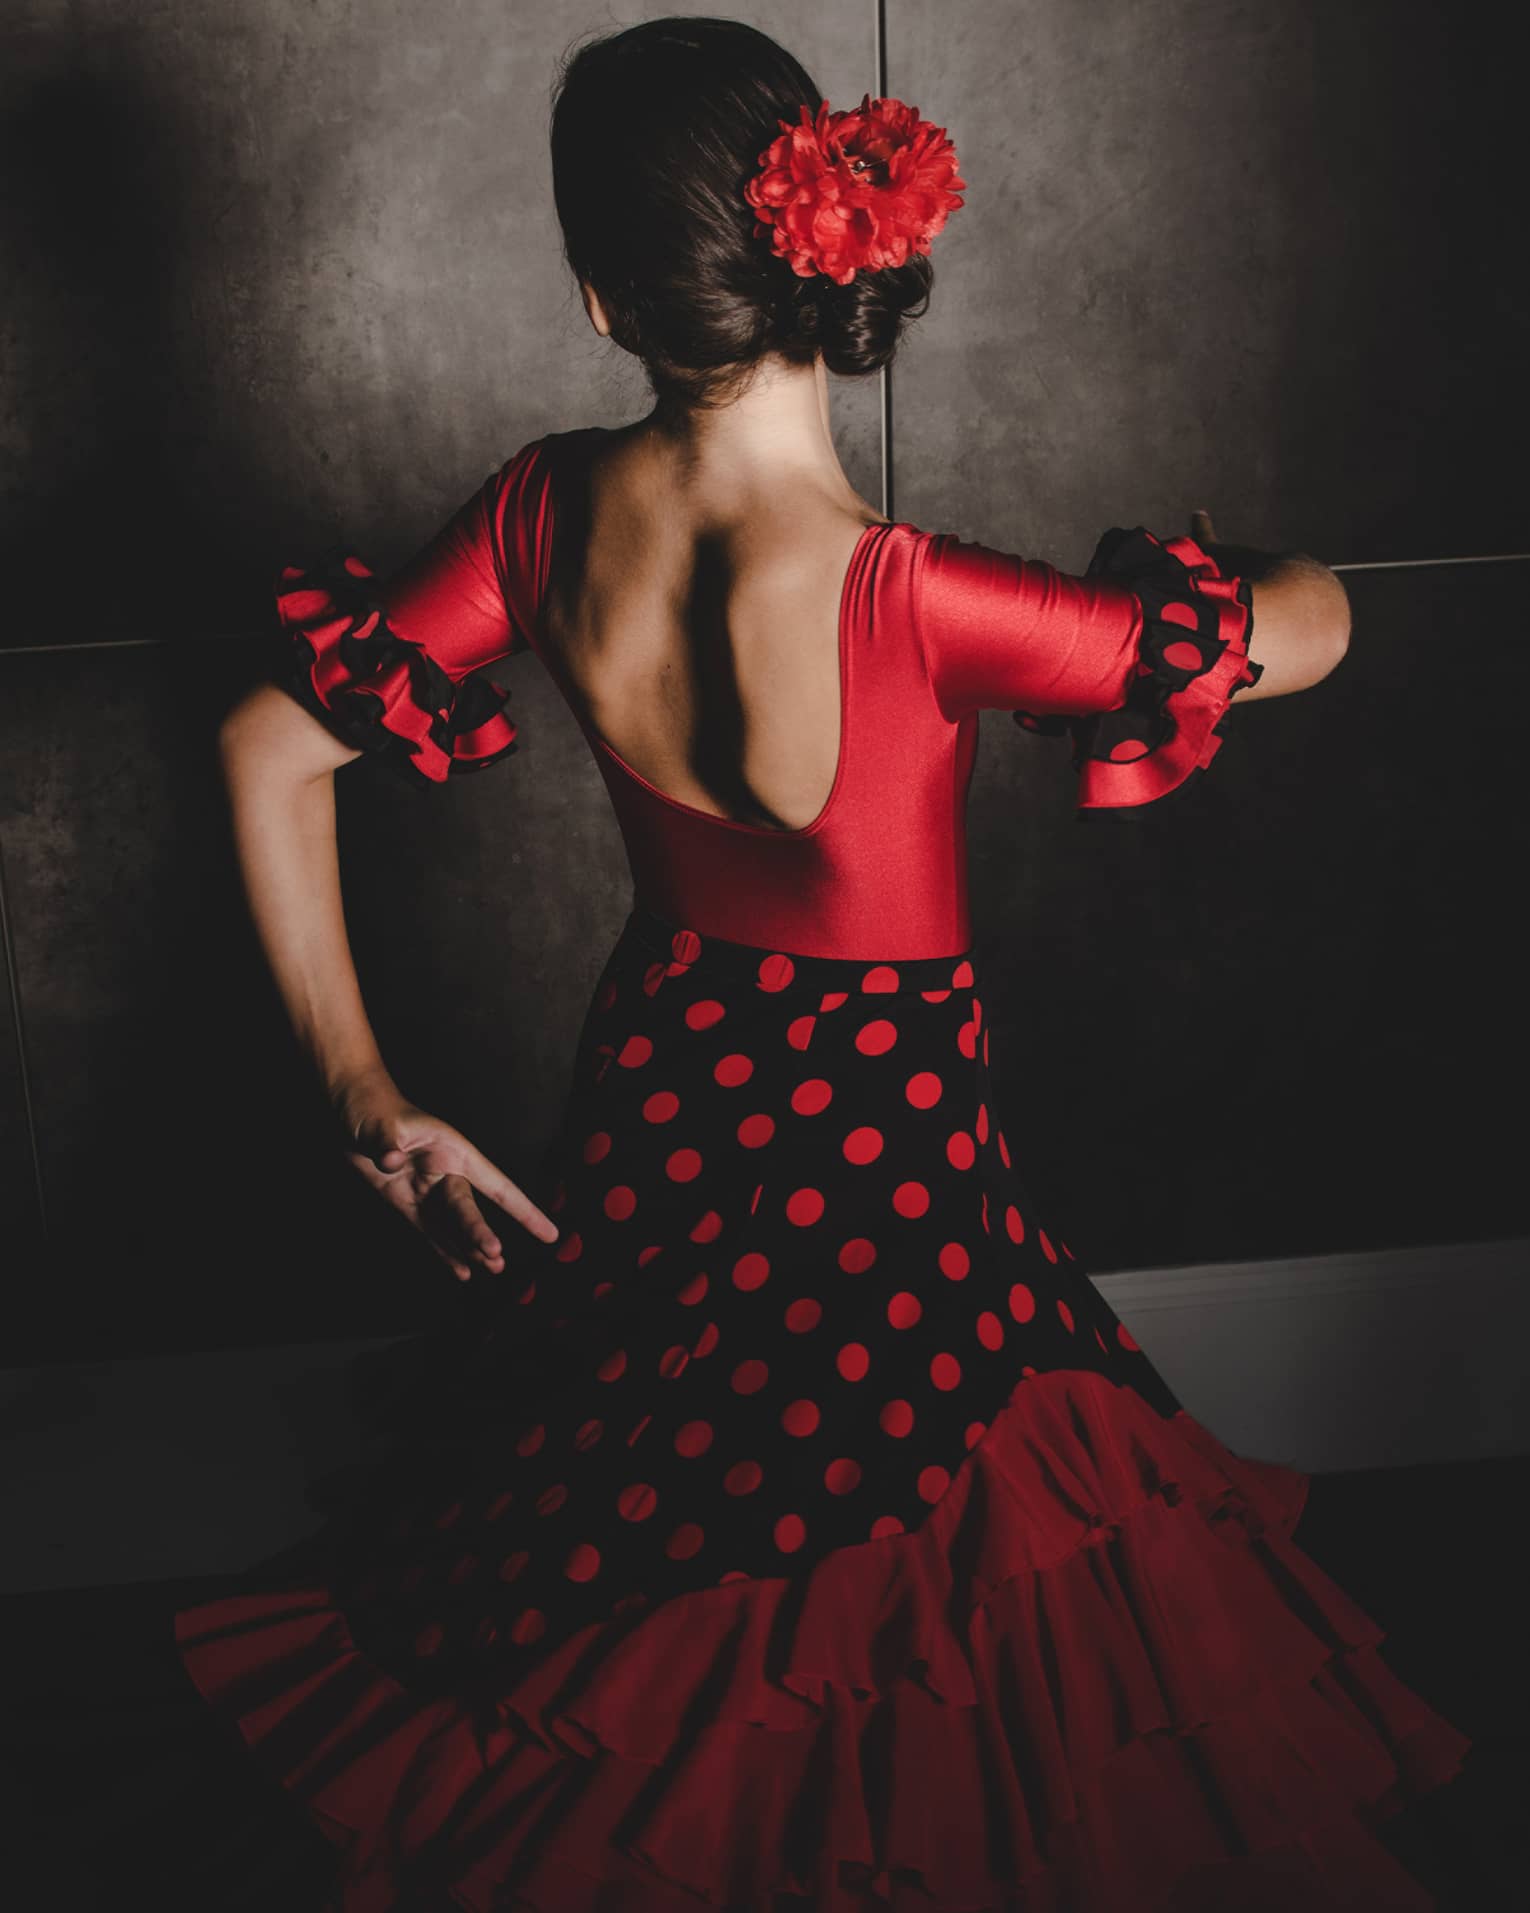 A woman wearing a black and red flamenco dress and red flower in her hair dances with her face turned away from the camera 